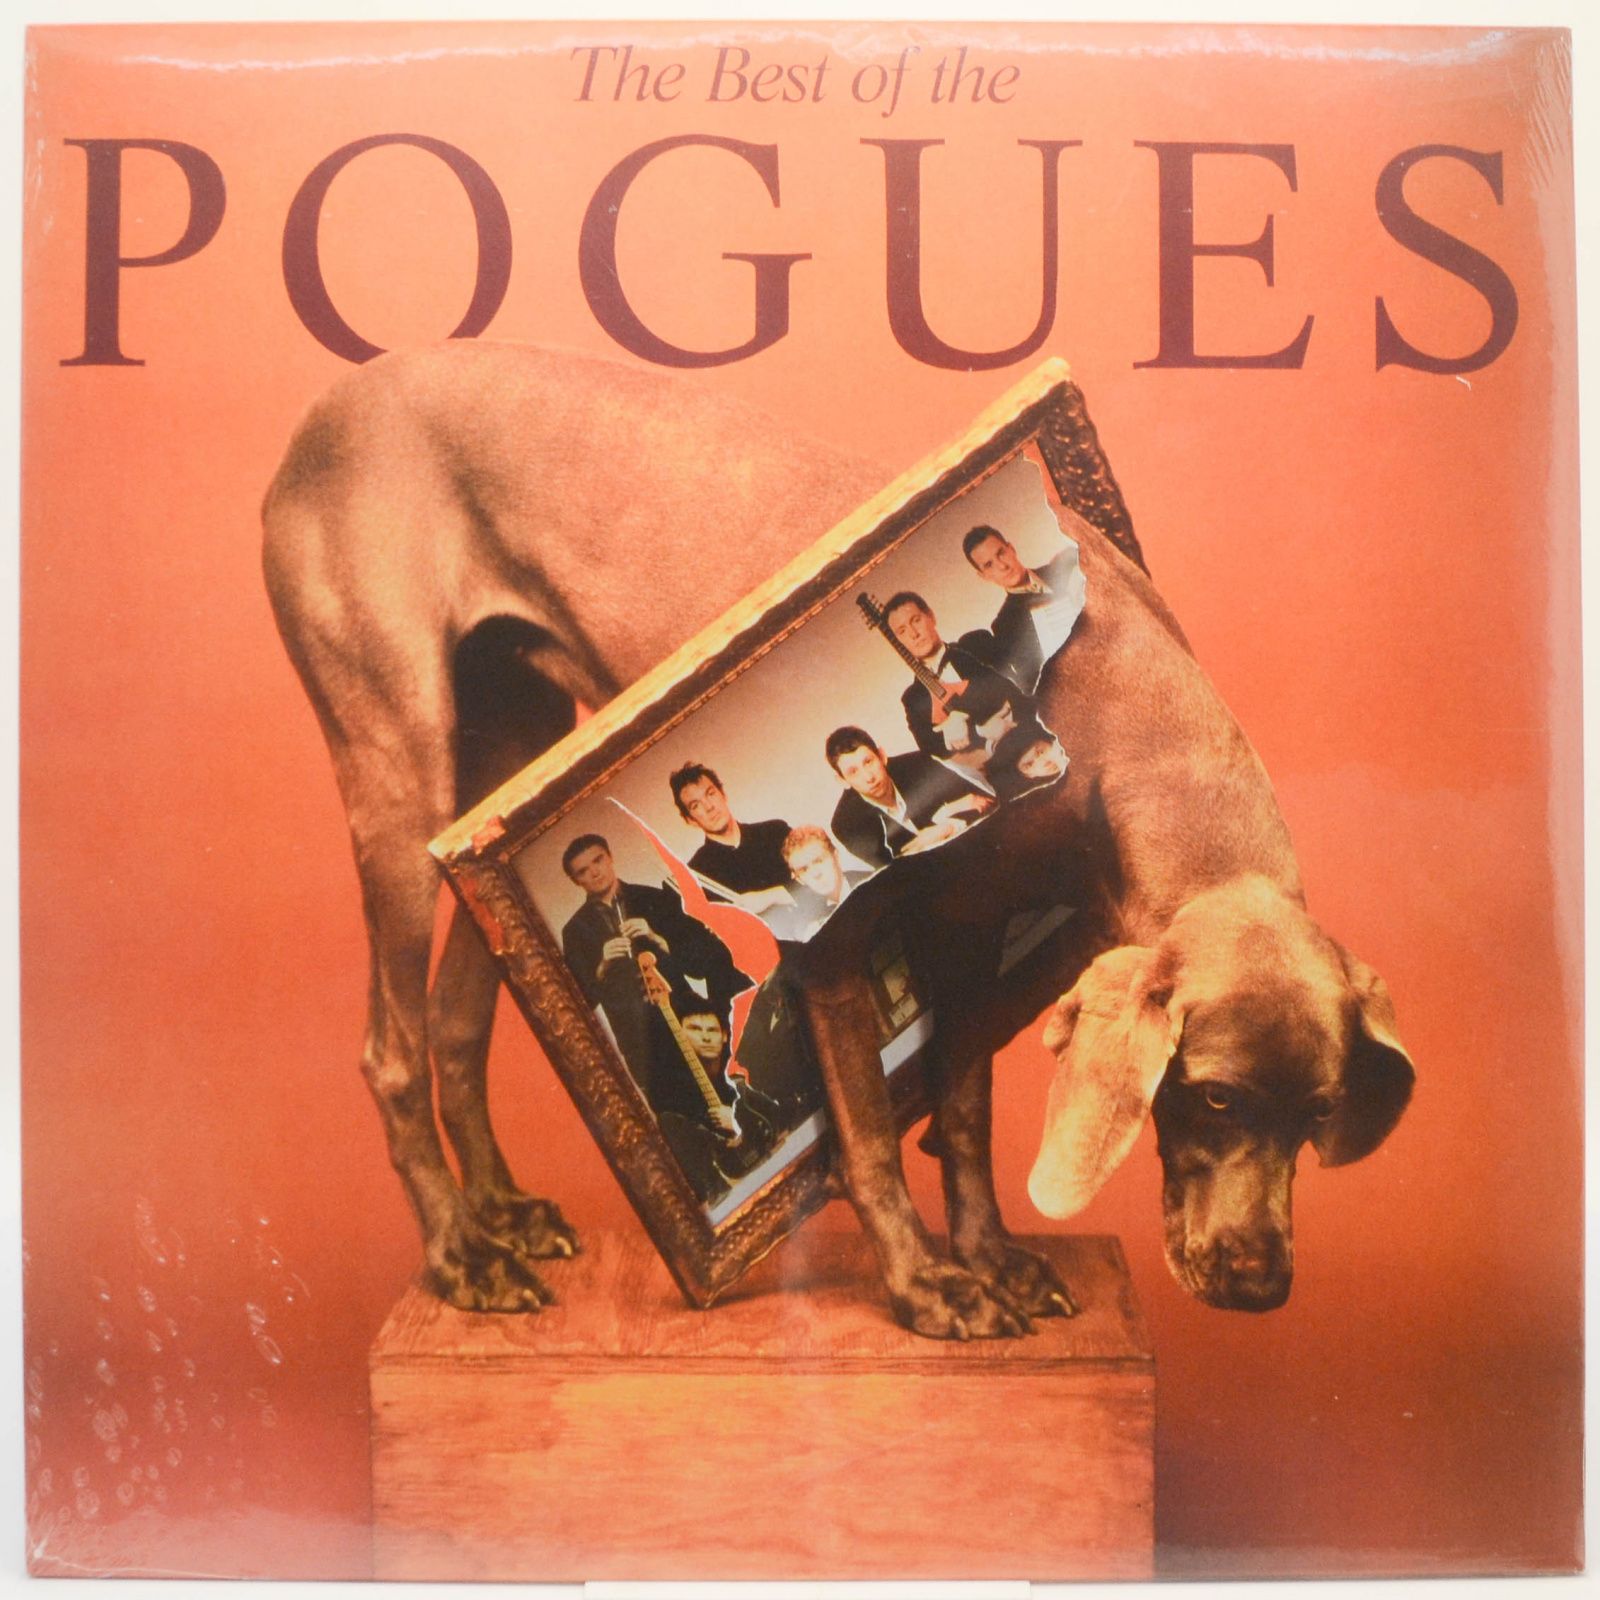 The Best Of The Pogues, 2018